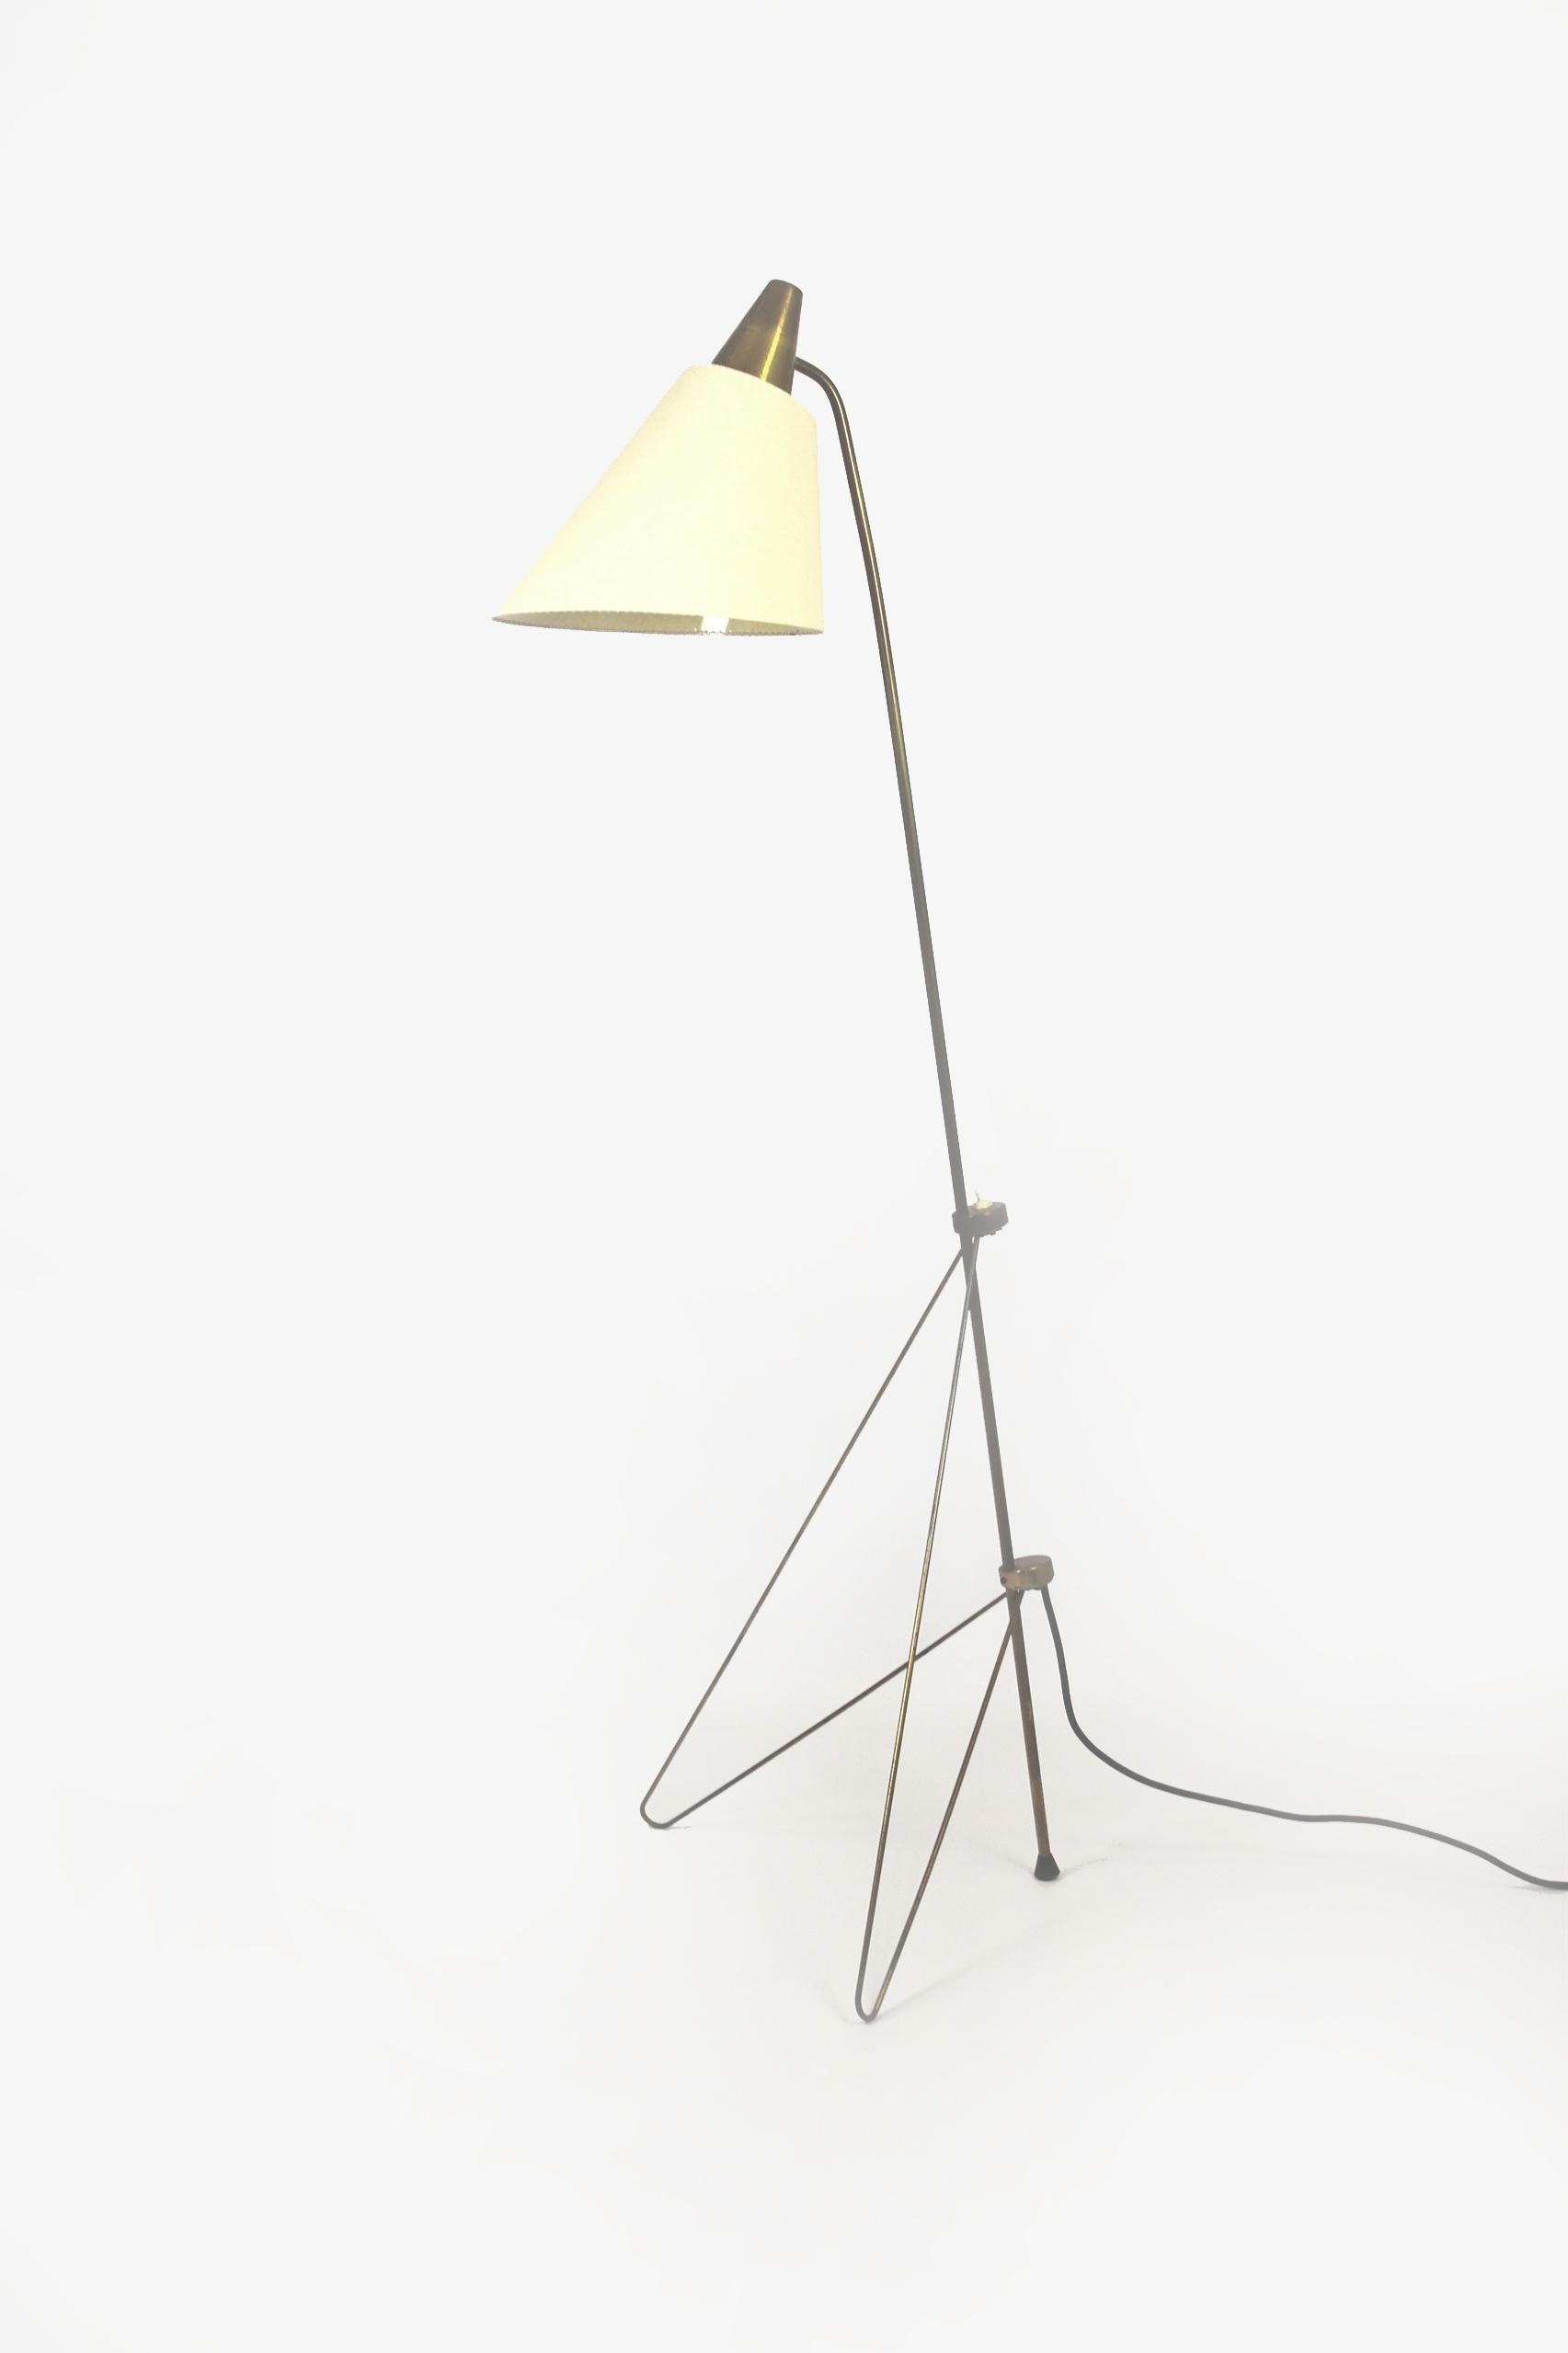 This floor lamp, called 